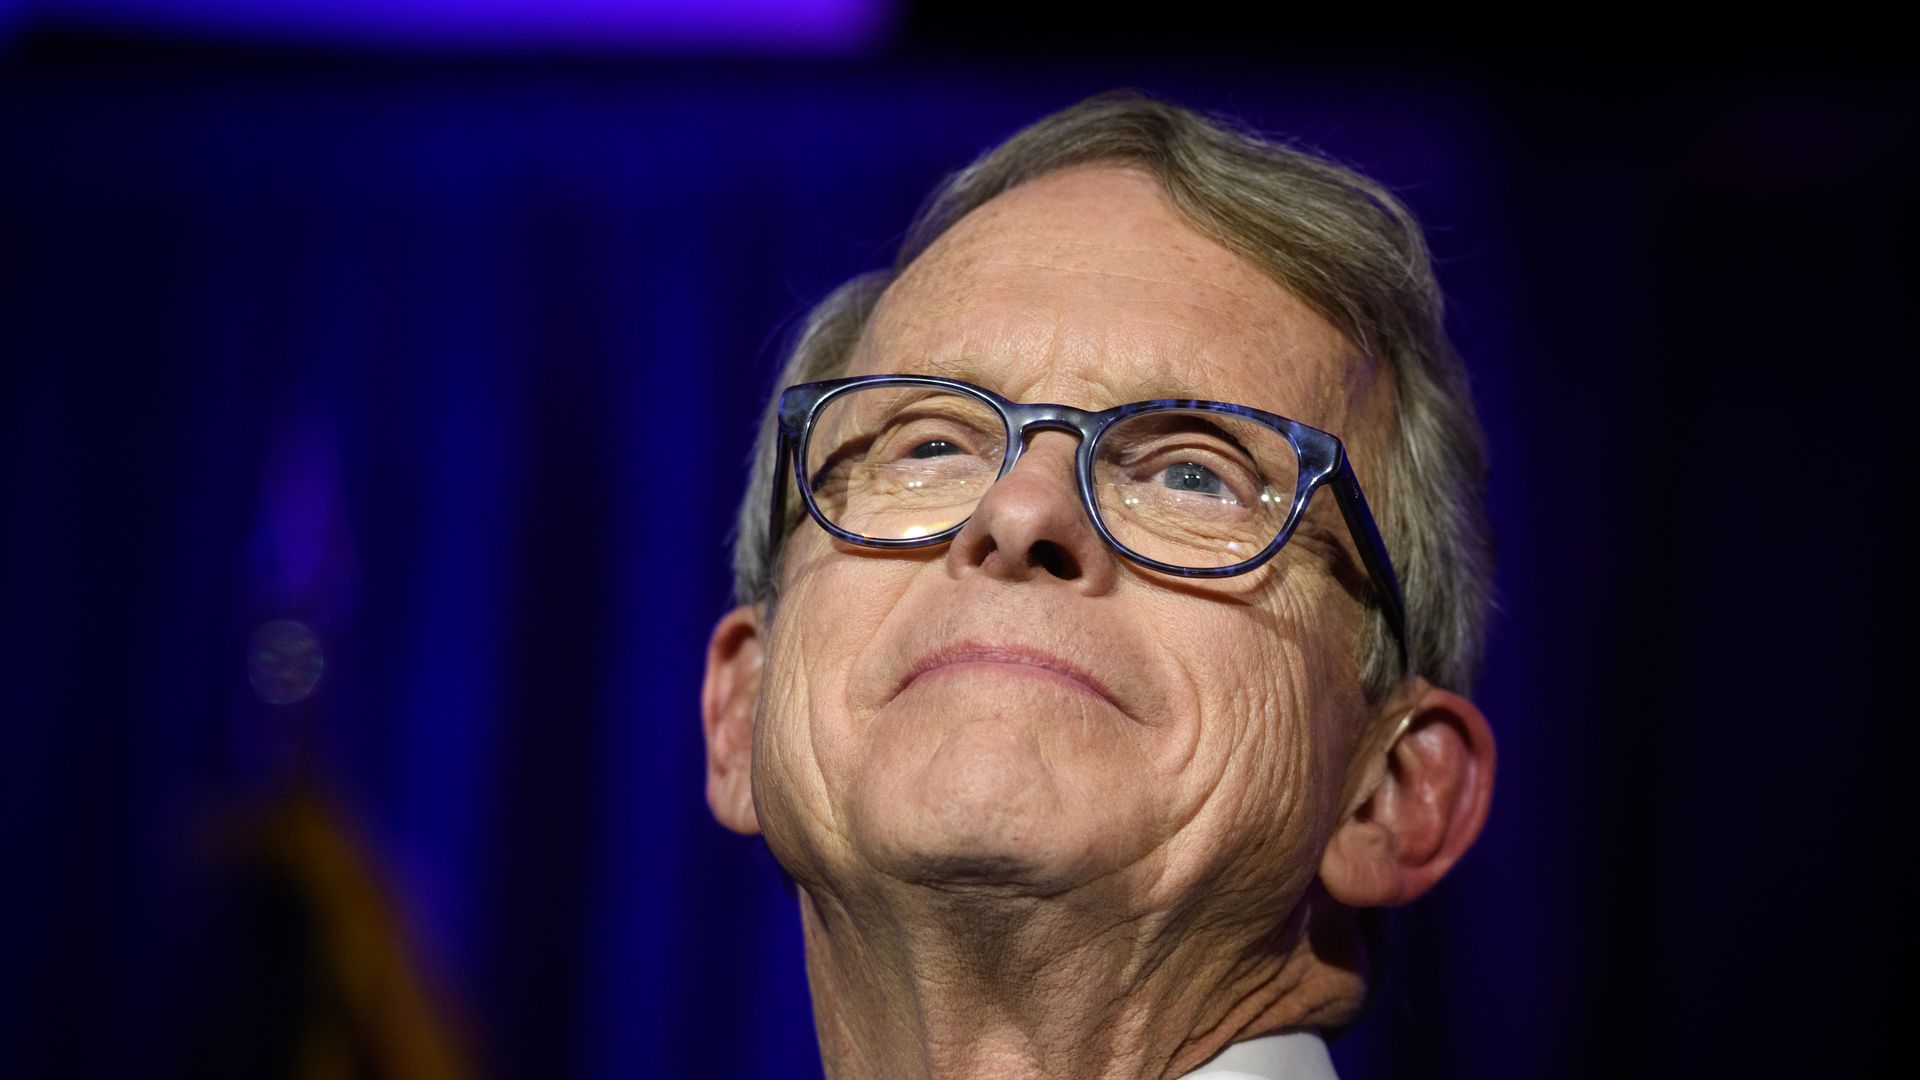 Ohio Gov. Mike DeWine is seen smiling after winning on election night.